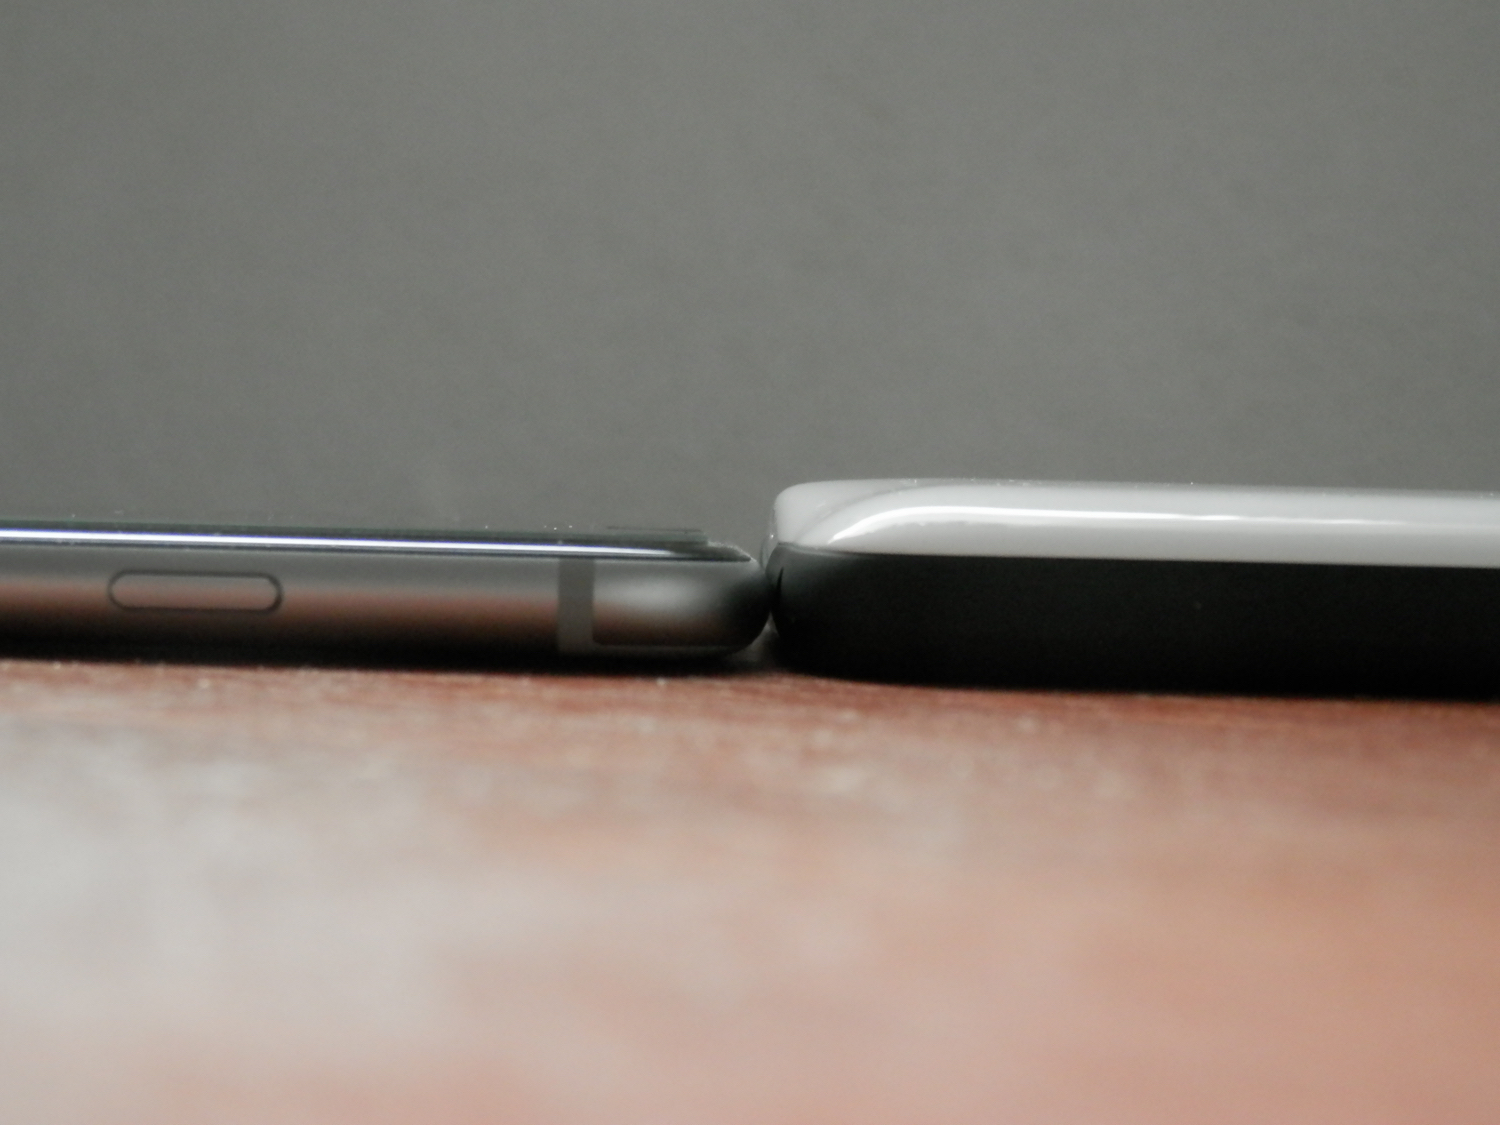 KUKE-Thickness-Compared-to-iPhone-6-Plus